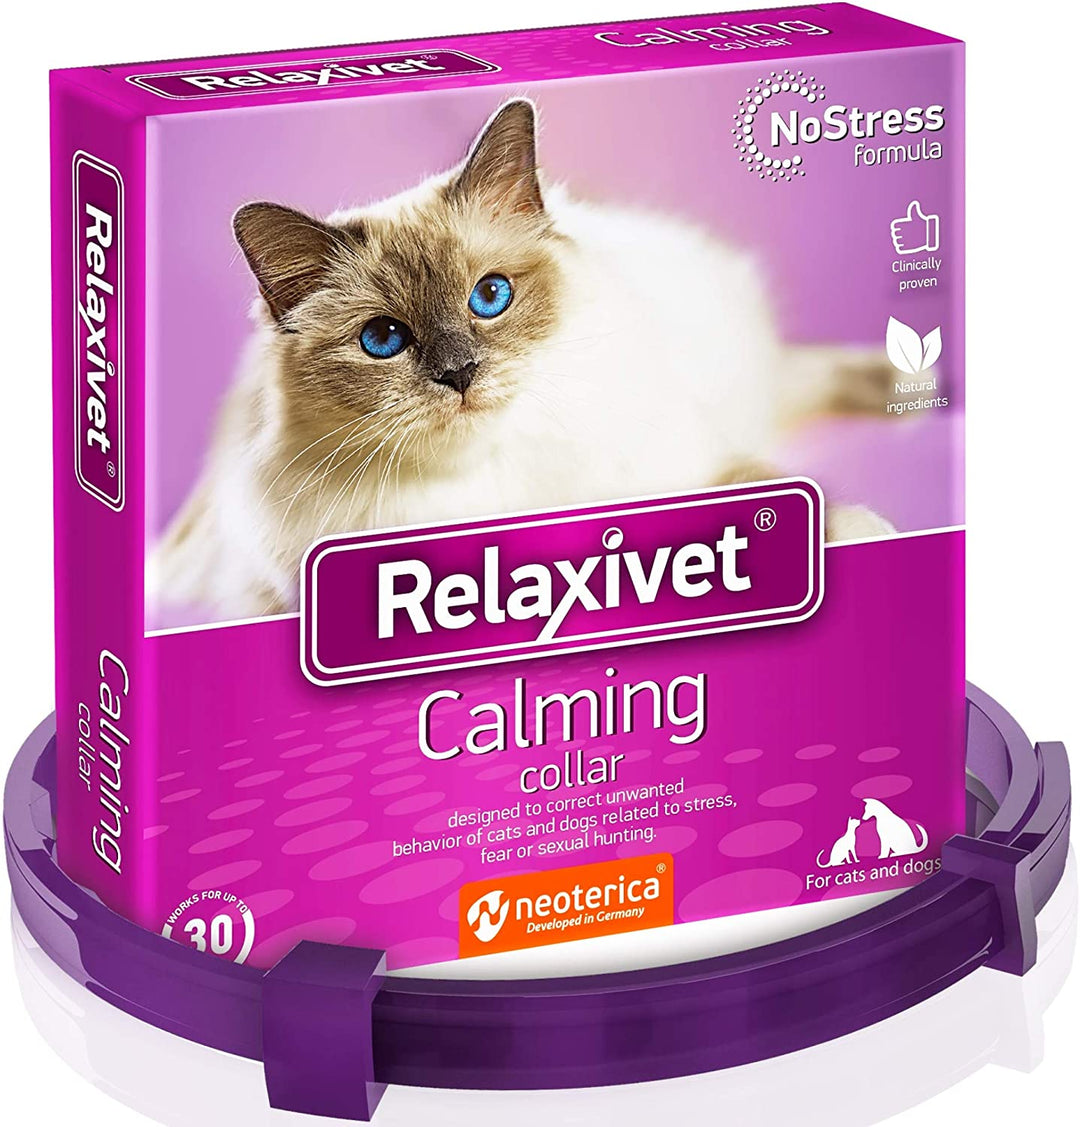 Relaxivet Calming Collar for Cats and Small Dogs - Reduce Anxiety Your Pets - The Best Replacement for Calming Chews Treats Drops Plug in - Belovedpetsbrand